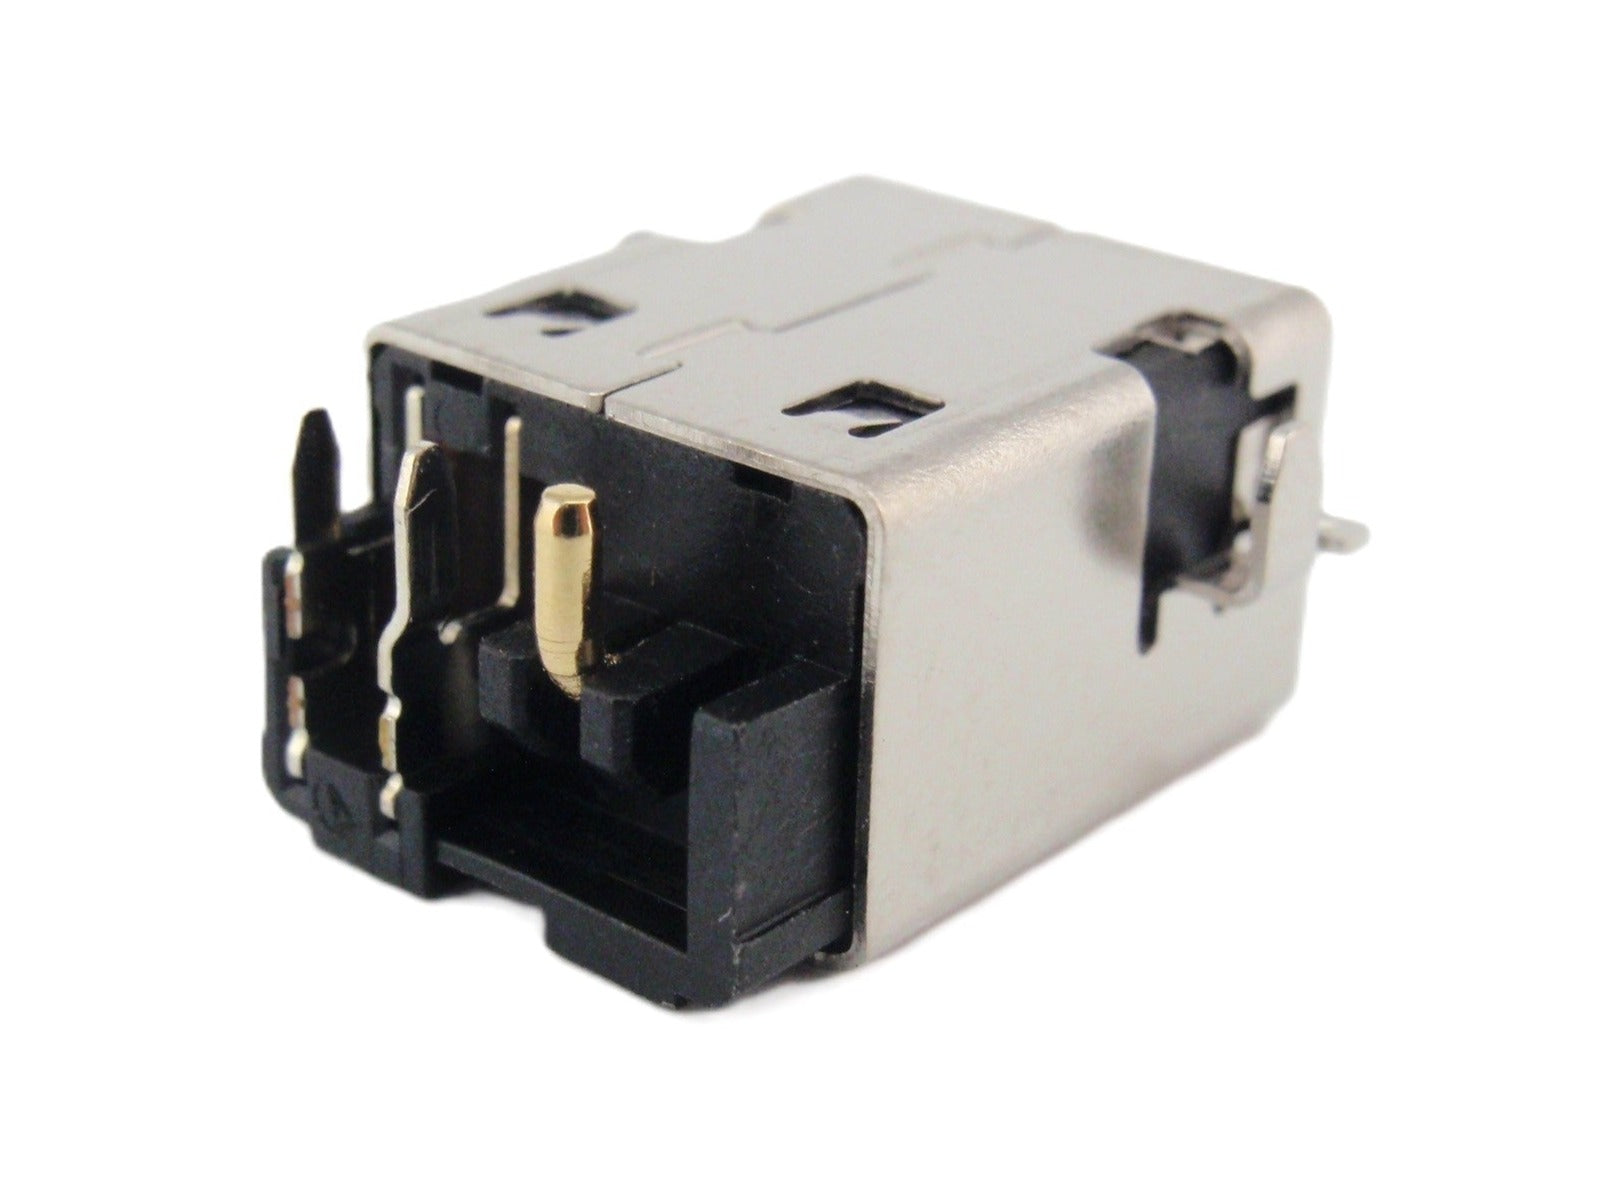 ASUS DC In Power Jack Charging Connector F75A G46 G46V G46VW X75 X75A X75S X75SV X75V X75VB X75VC X75VD VX7 VX7SX VX7SX-1A